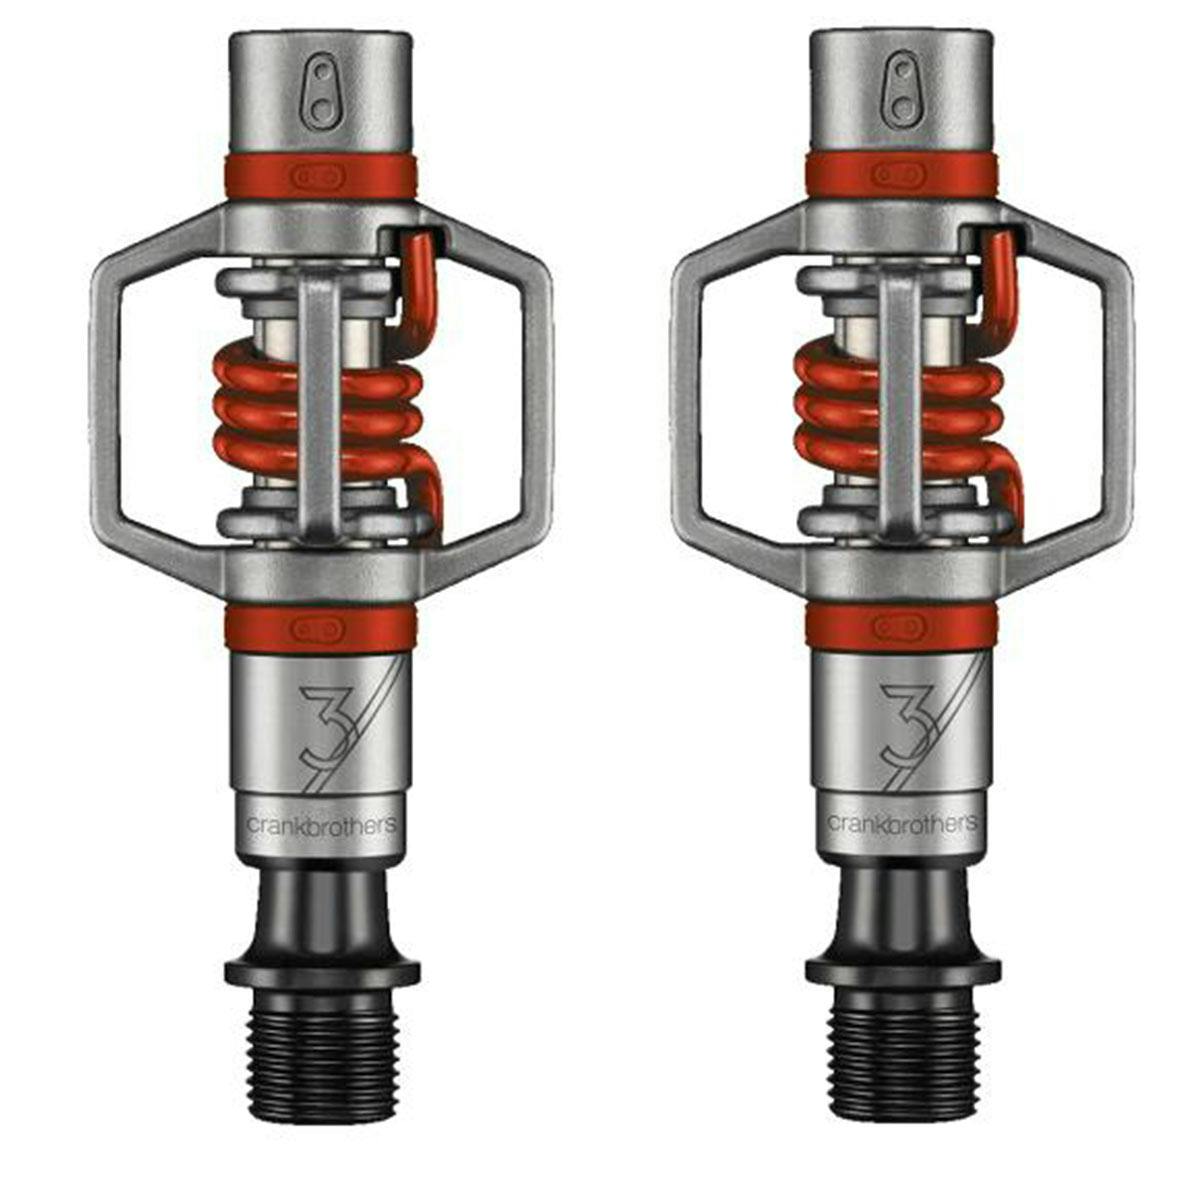 Crank Brothers Eggbeater 3 Pedals *Damaged Packaging* 2019 - Red